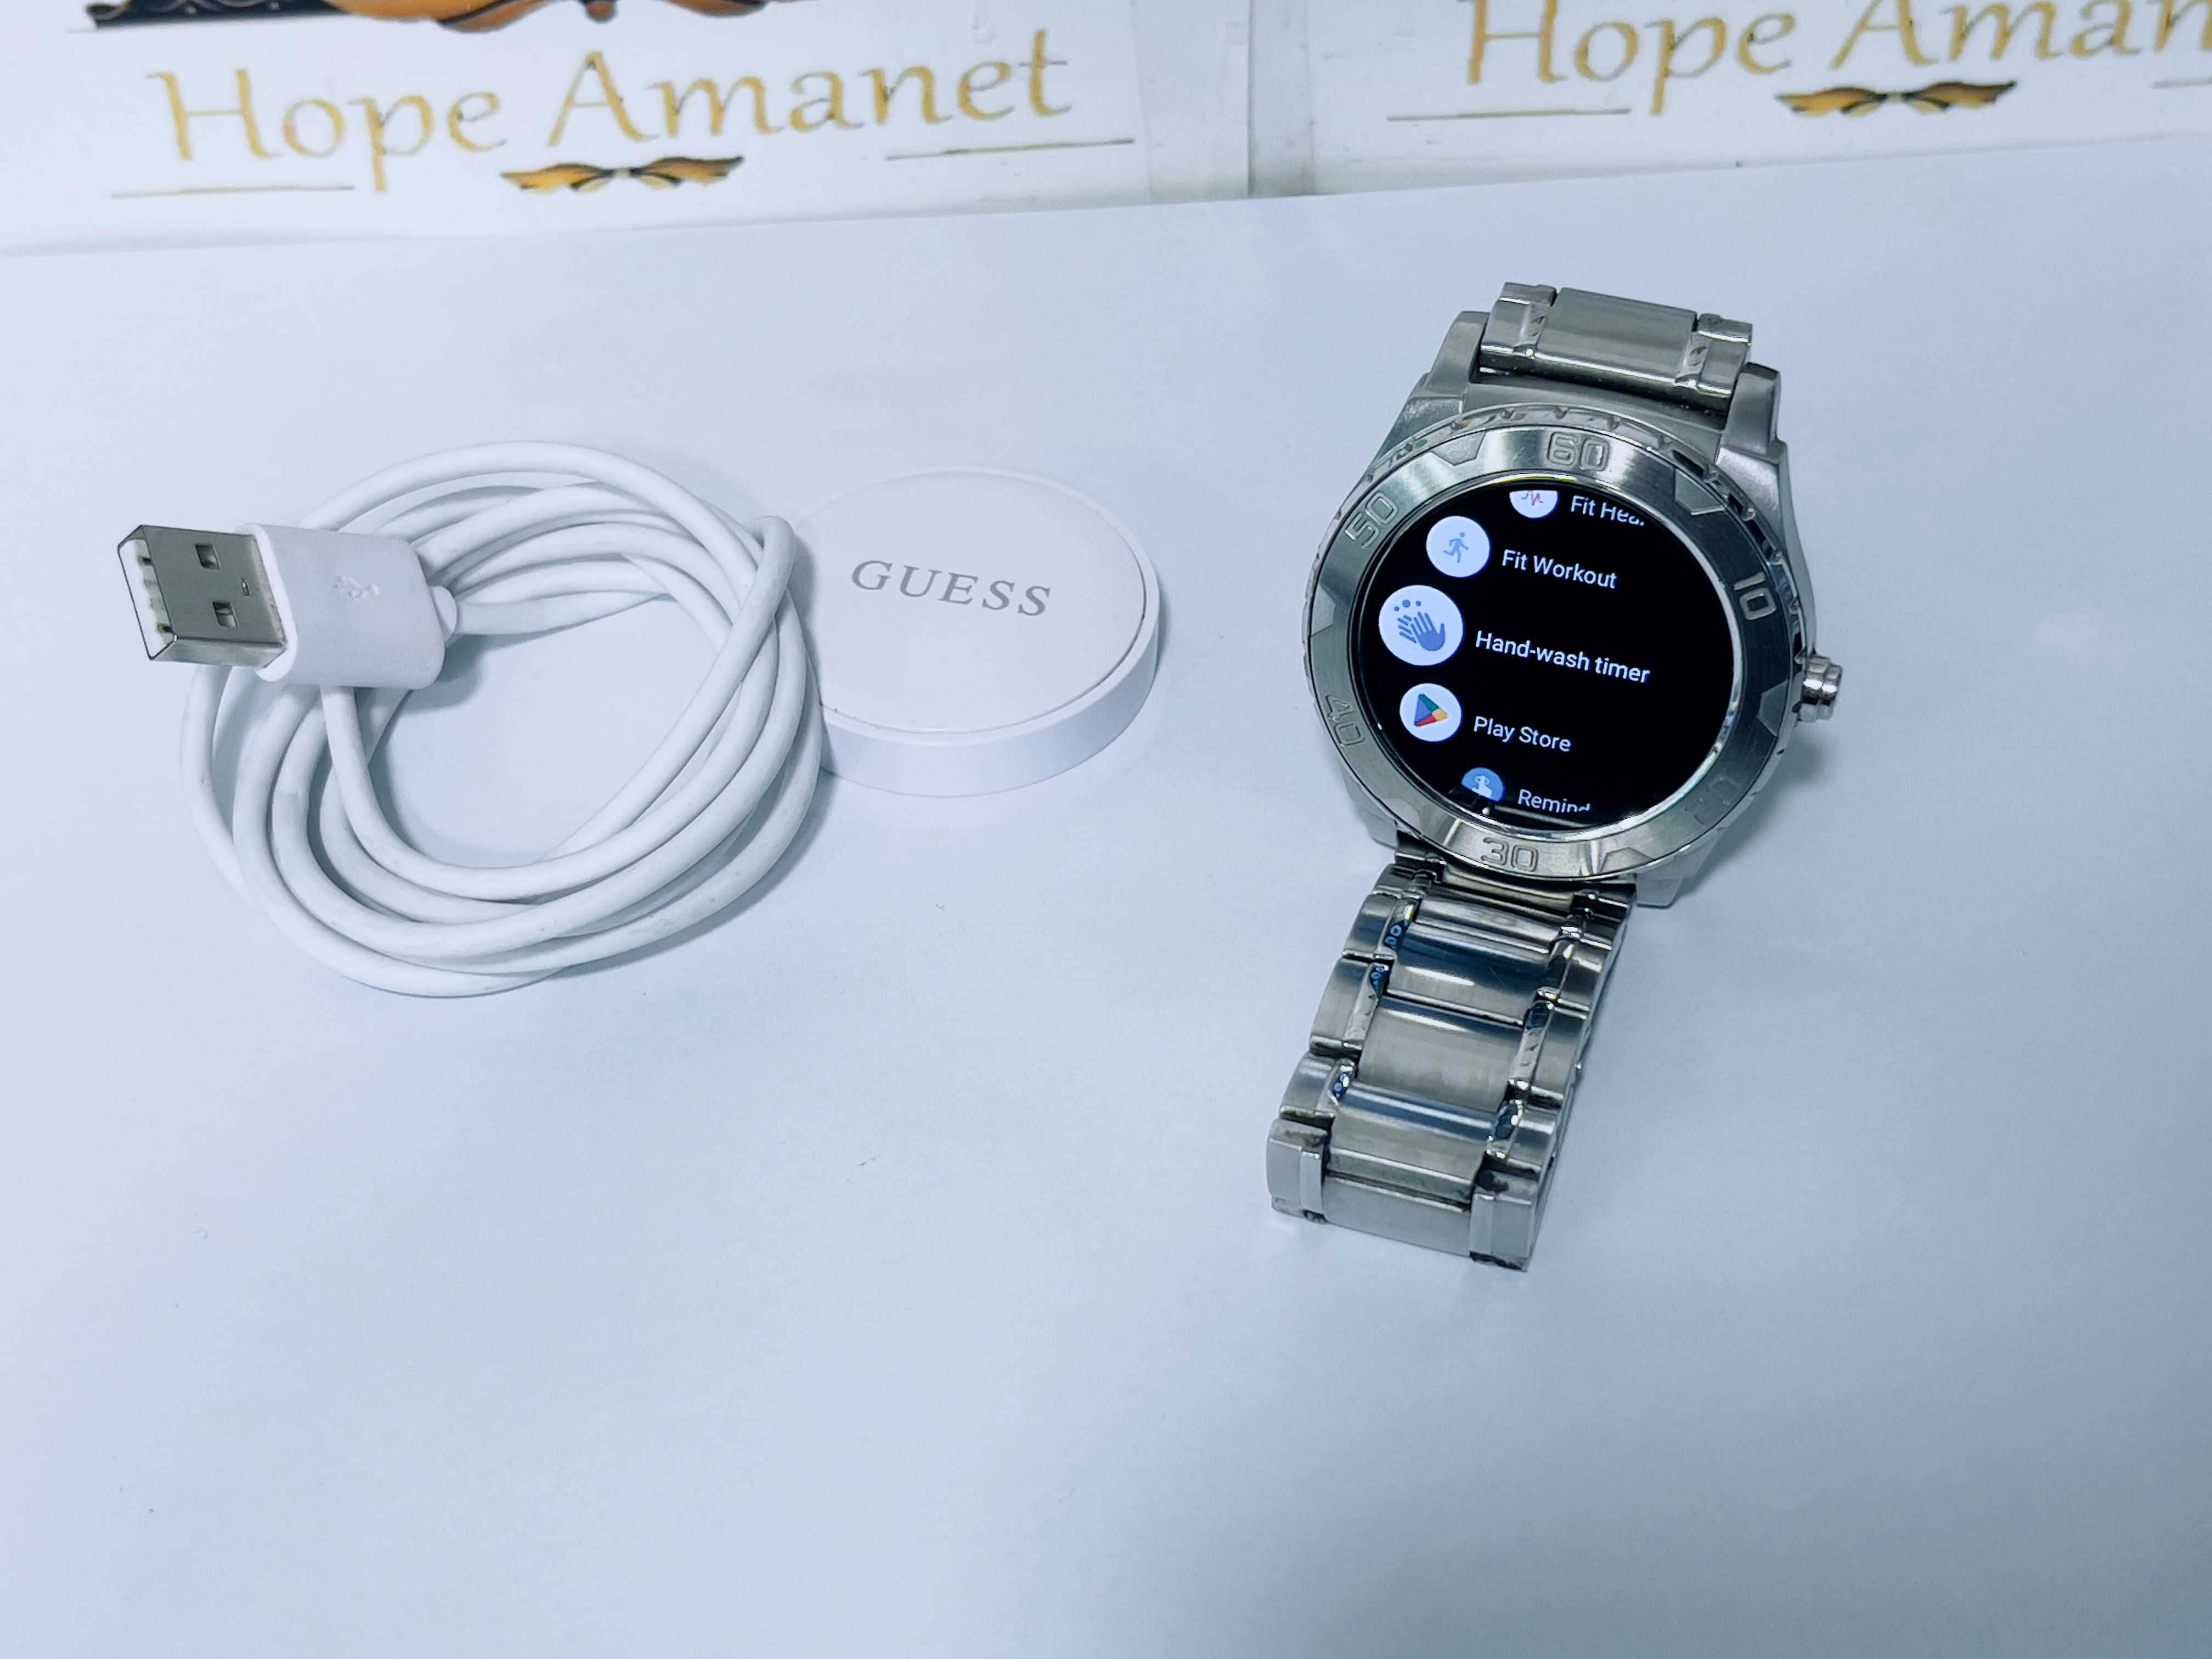 Hope Amanet P10/Smart Watch Guess C1001G4